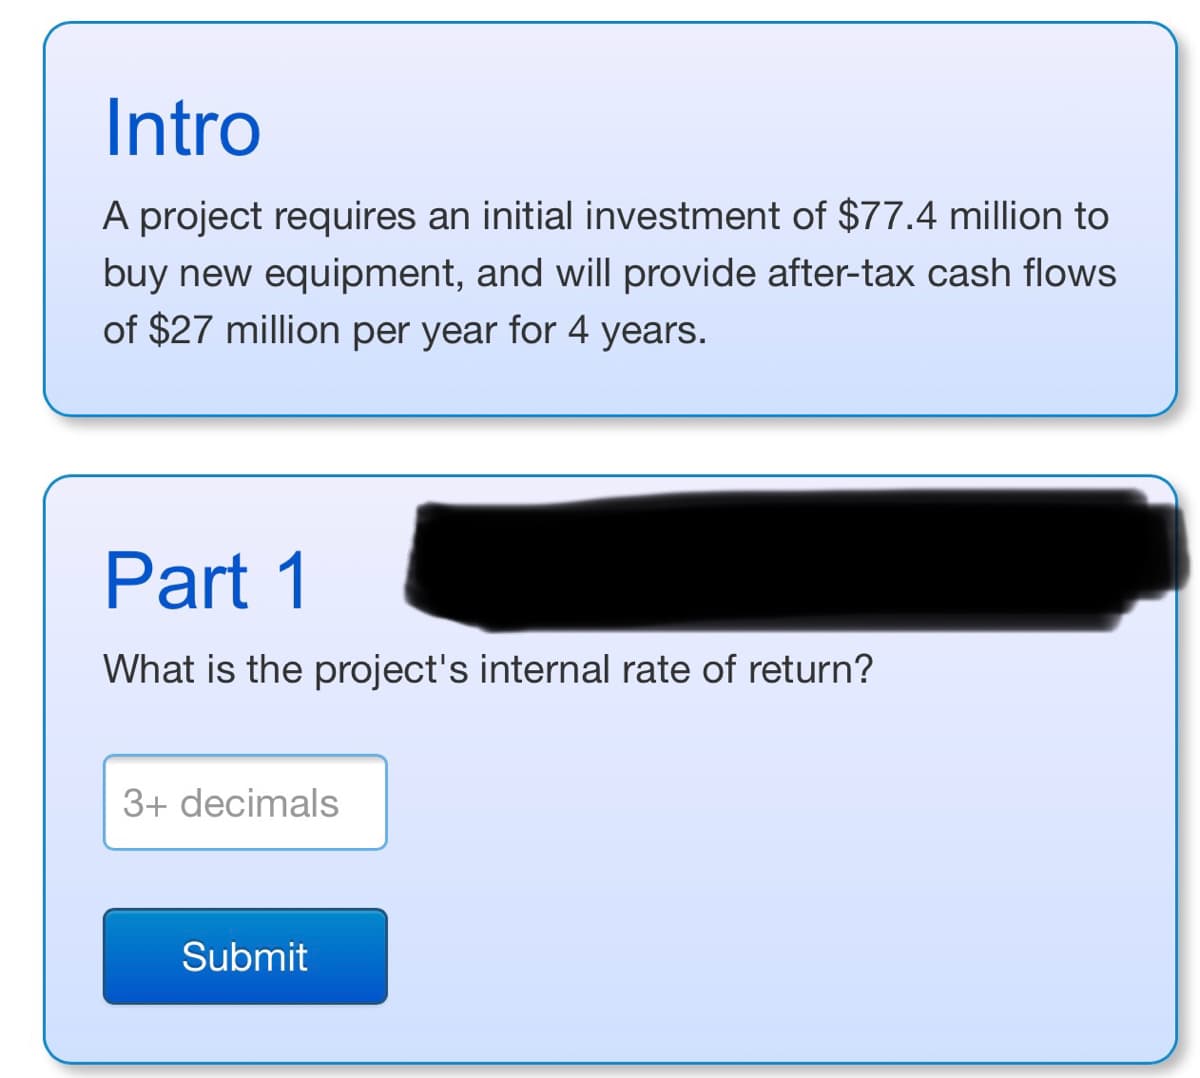 Intro
A project requires an initial investment of $77.4 million to
buy new equipment, and will provide after-tax cash flows
of $27 million per year for 4 years.
Part 1
What is the project's internal rate of return?
3+ decimals
Submit